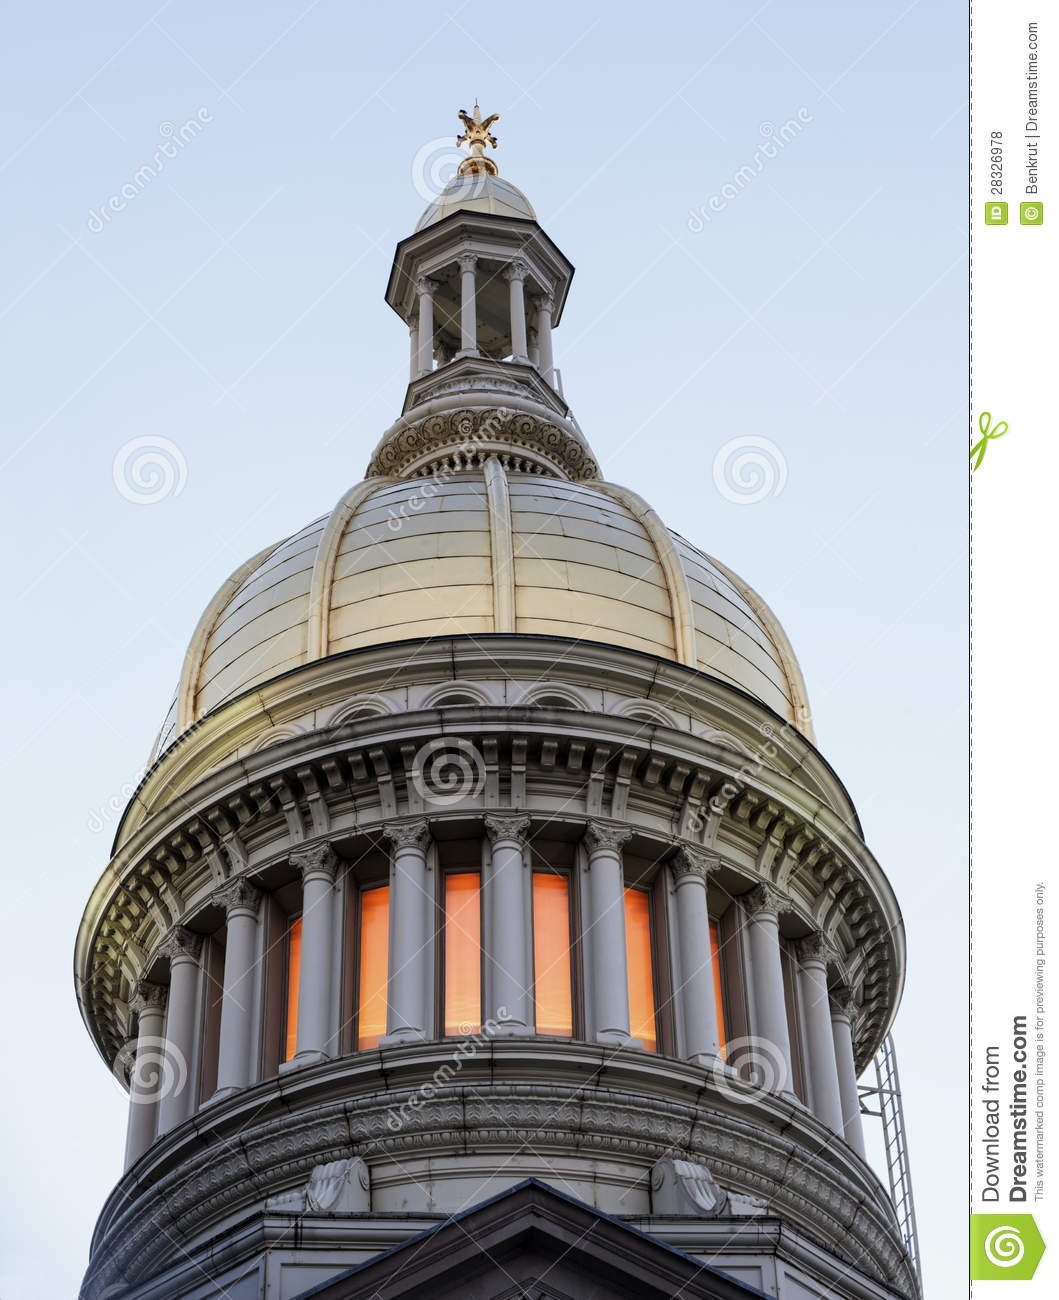 Trenton New Jersey   State Capitol Building Royalty Free Stock Photos